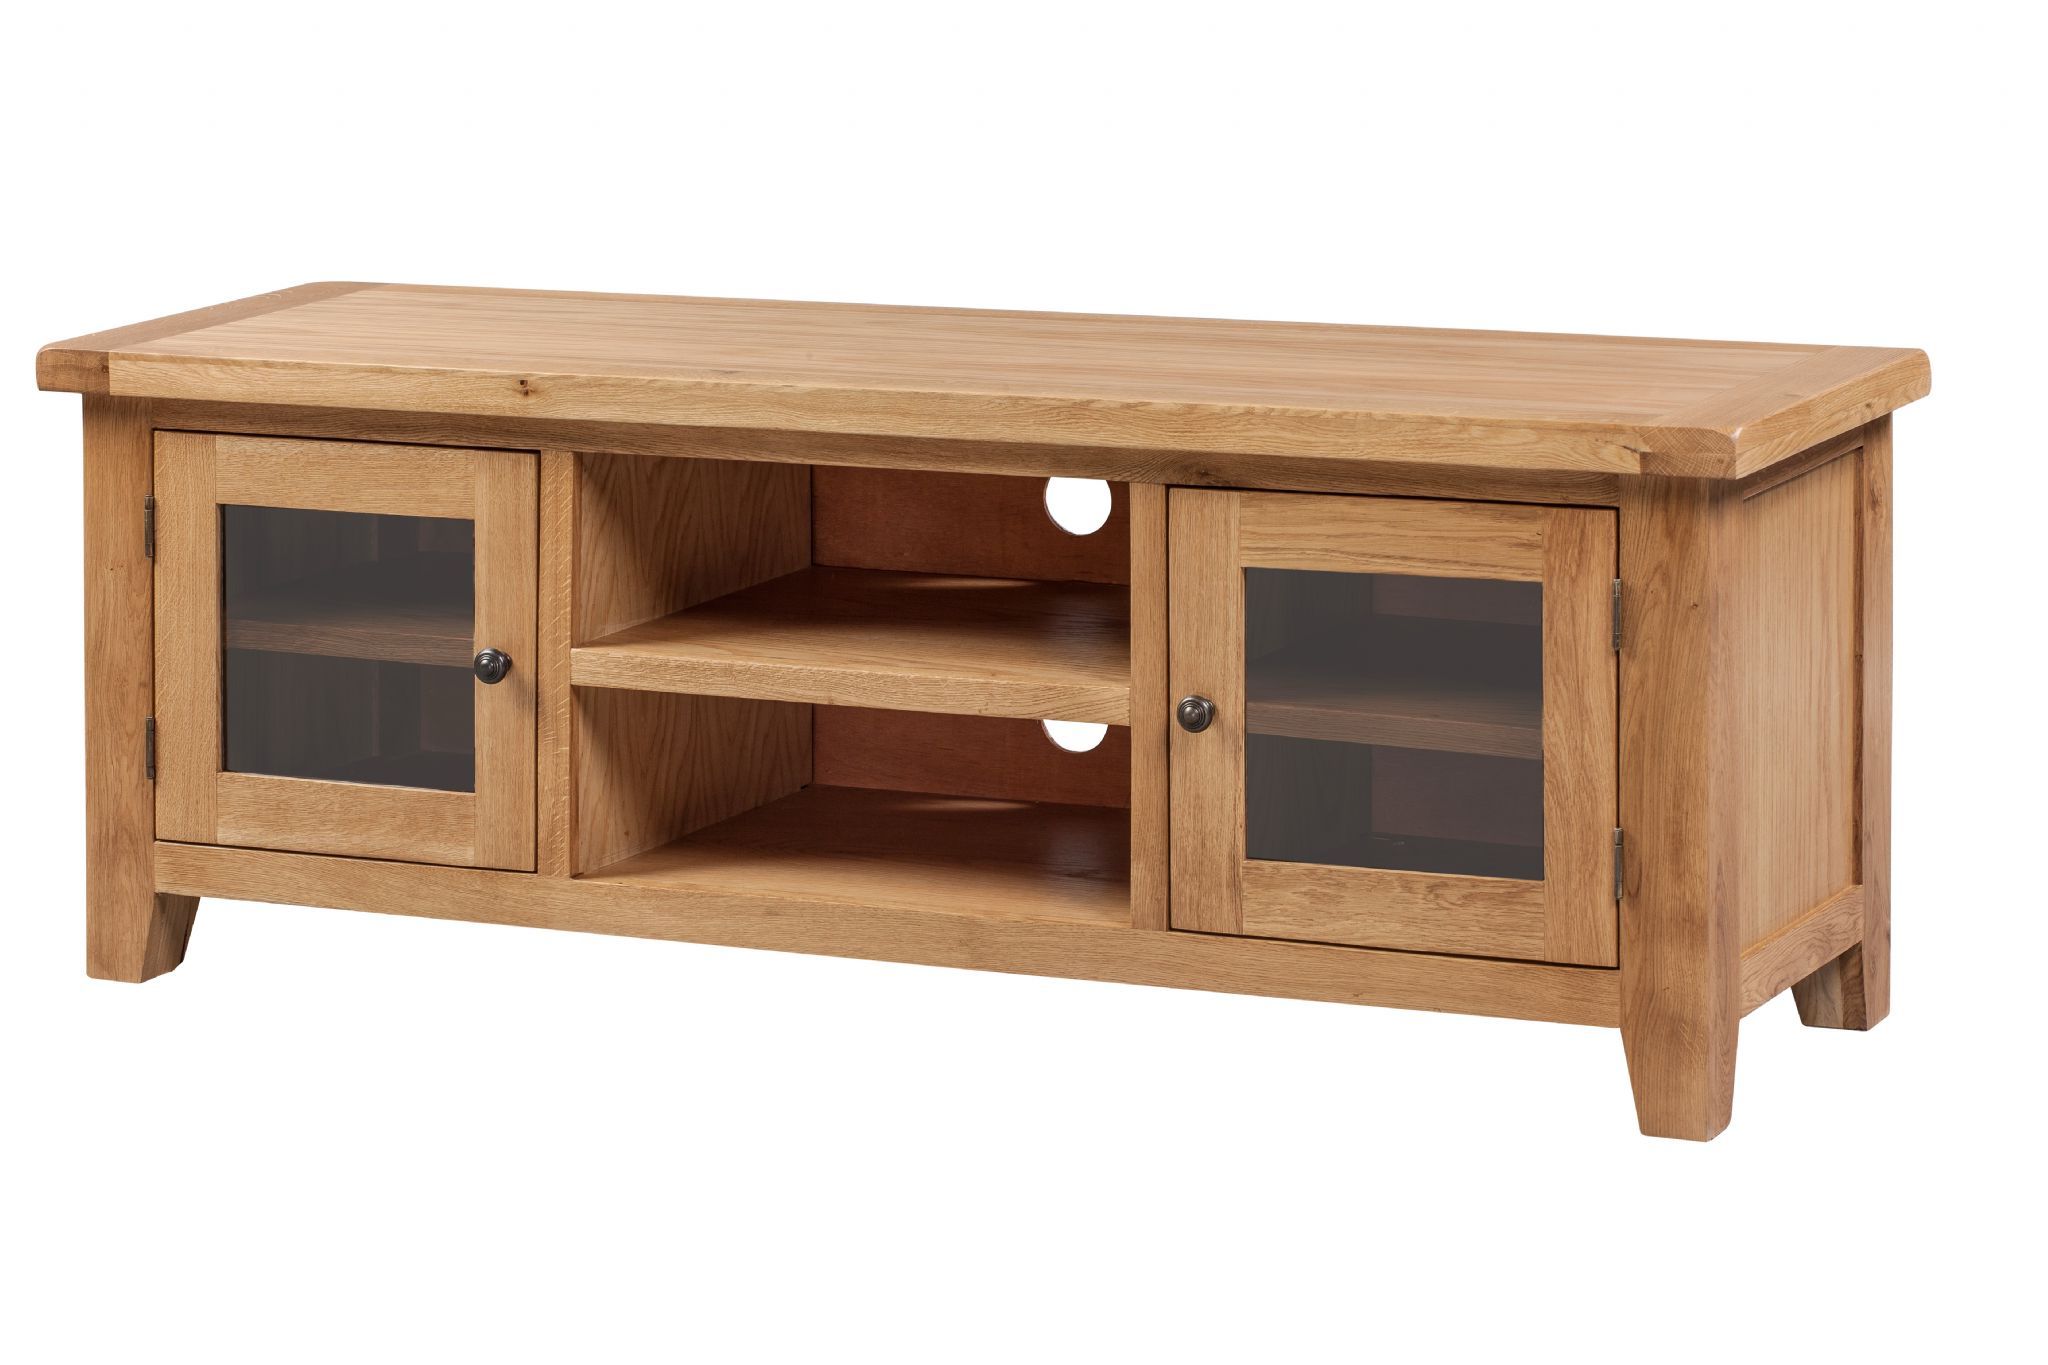 Loxley Oak Extra Large Tv Stand With Dillon Tv Stands Oak (View 17 of 20)